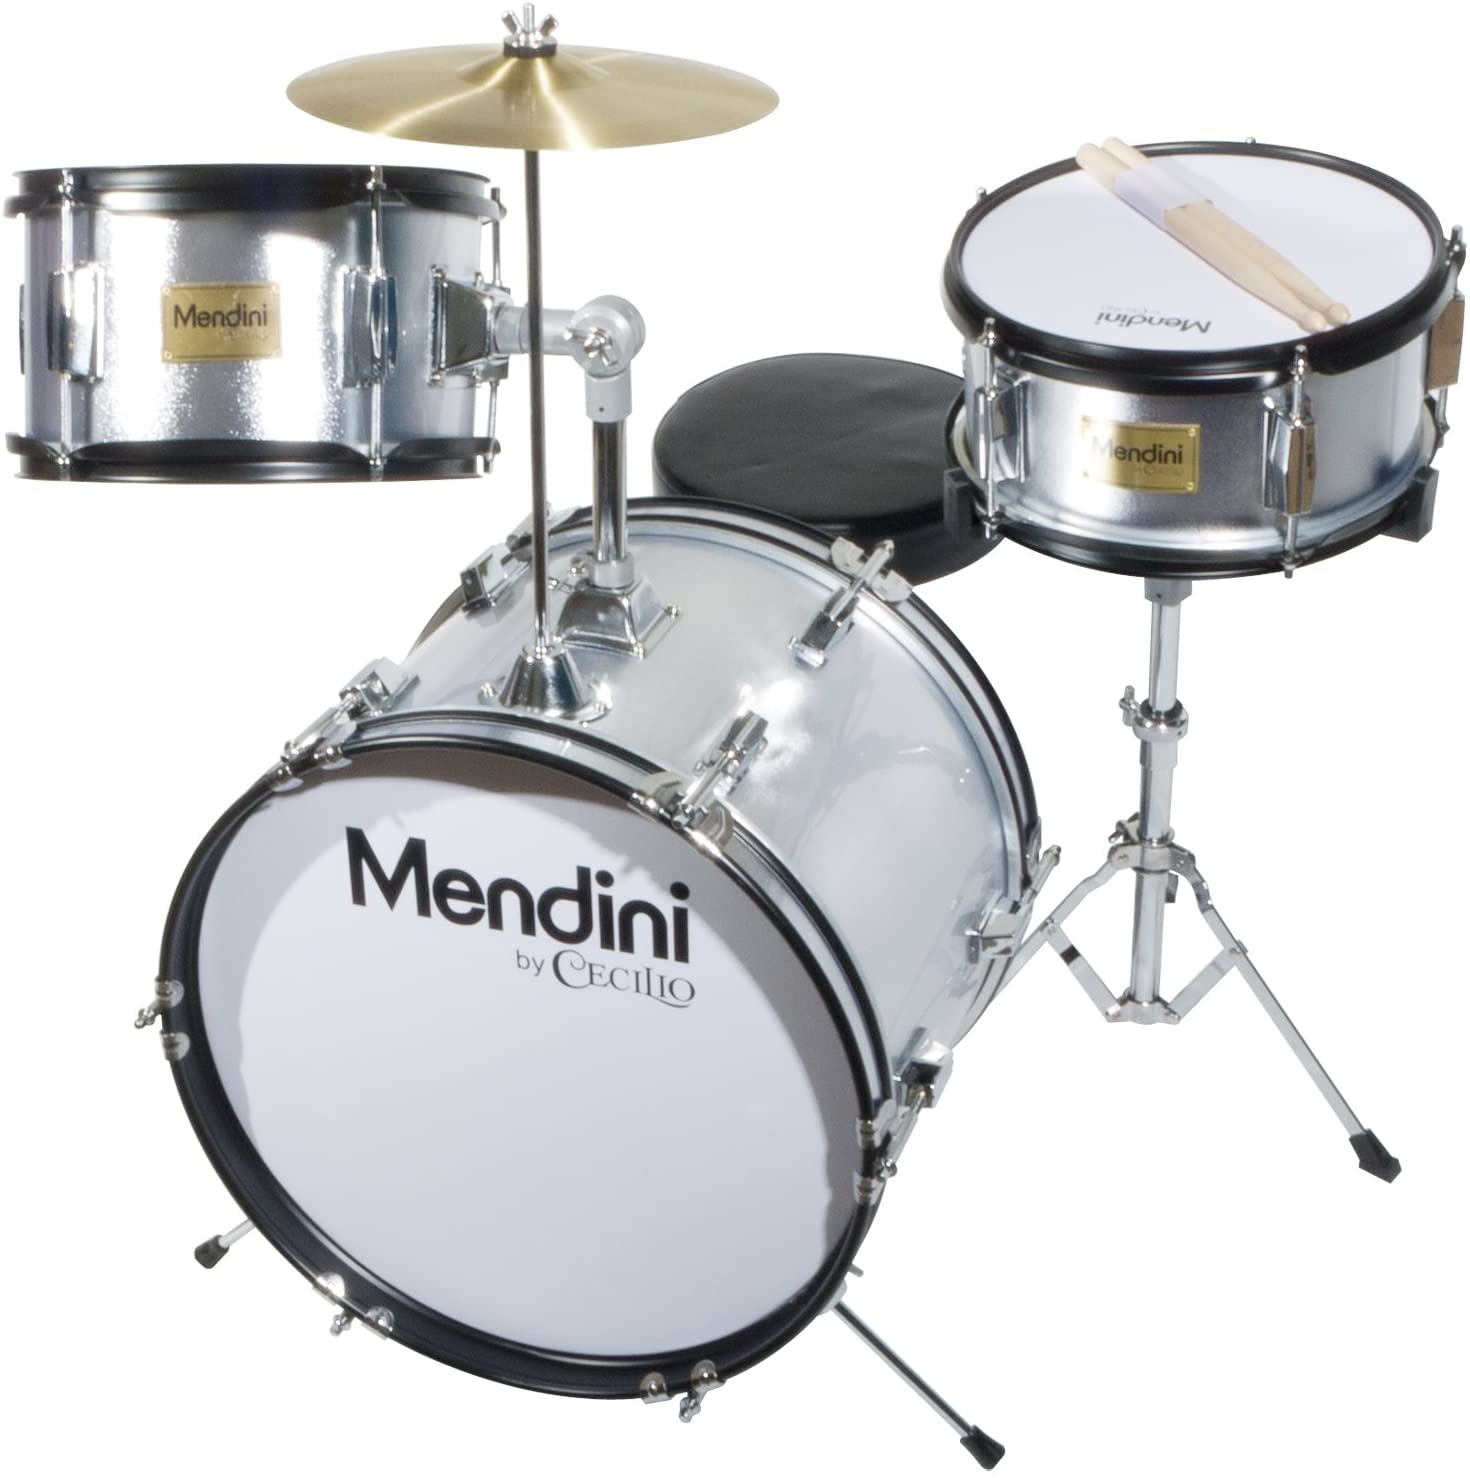 Mendini by Cecilio 16 inch 3-Piece Kids/Junior Drum Set with Adjustable Throne, Cymbal, Pedal & Drumsticks, Metallic Green, MJDS-3-GN 14